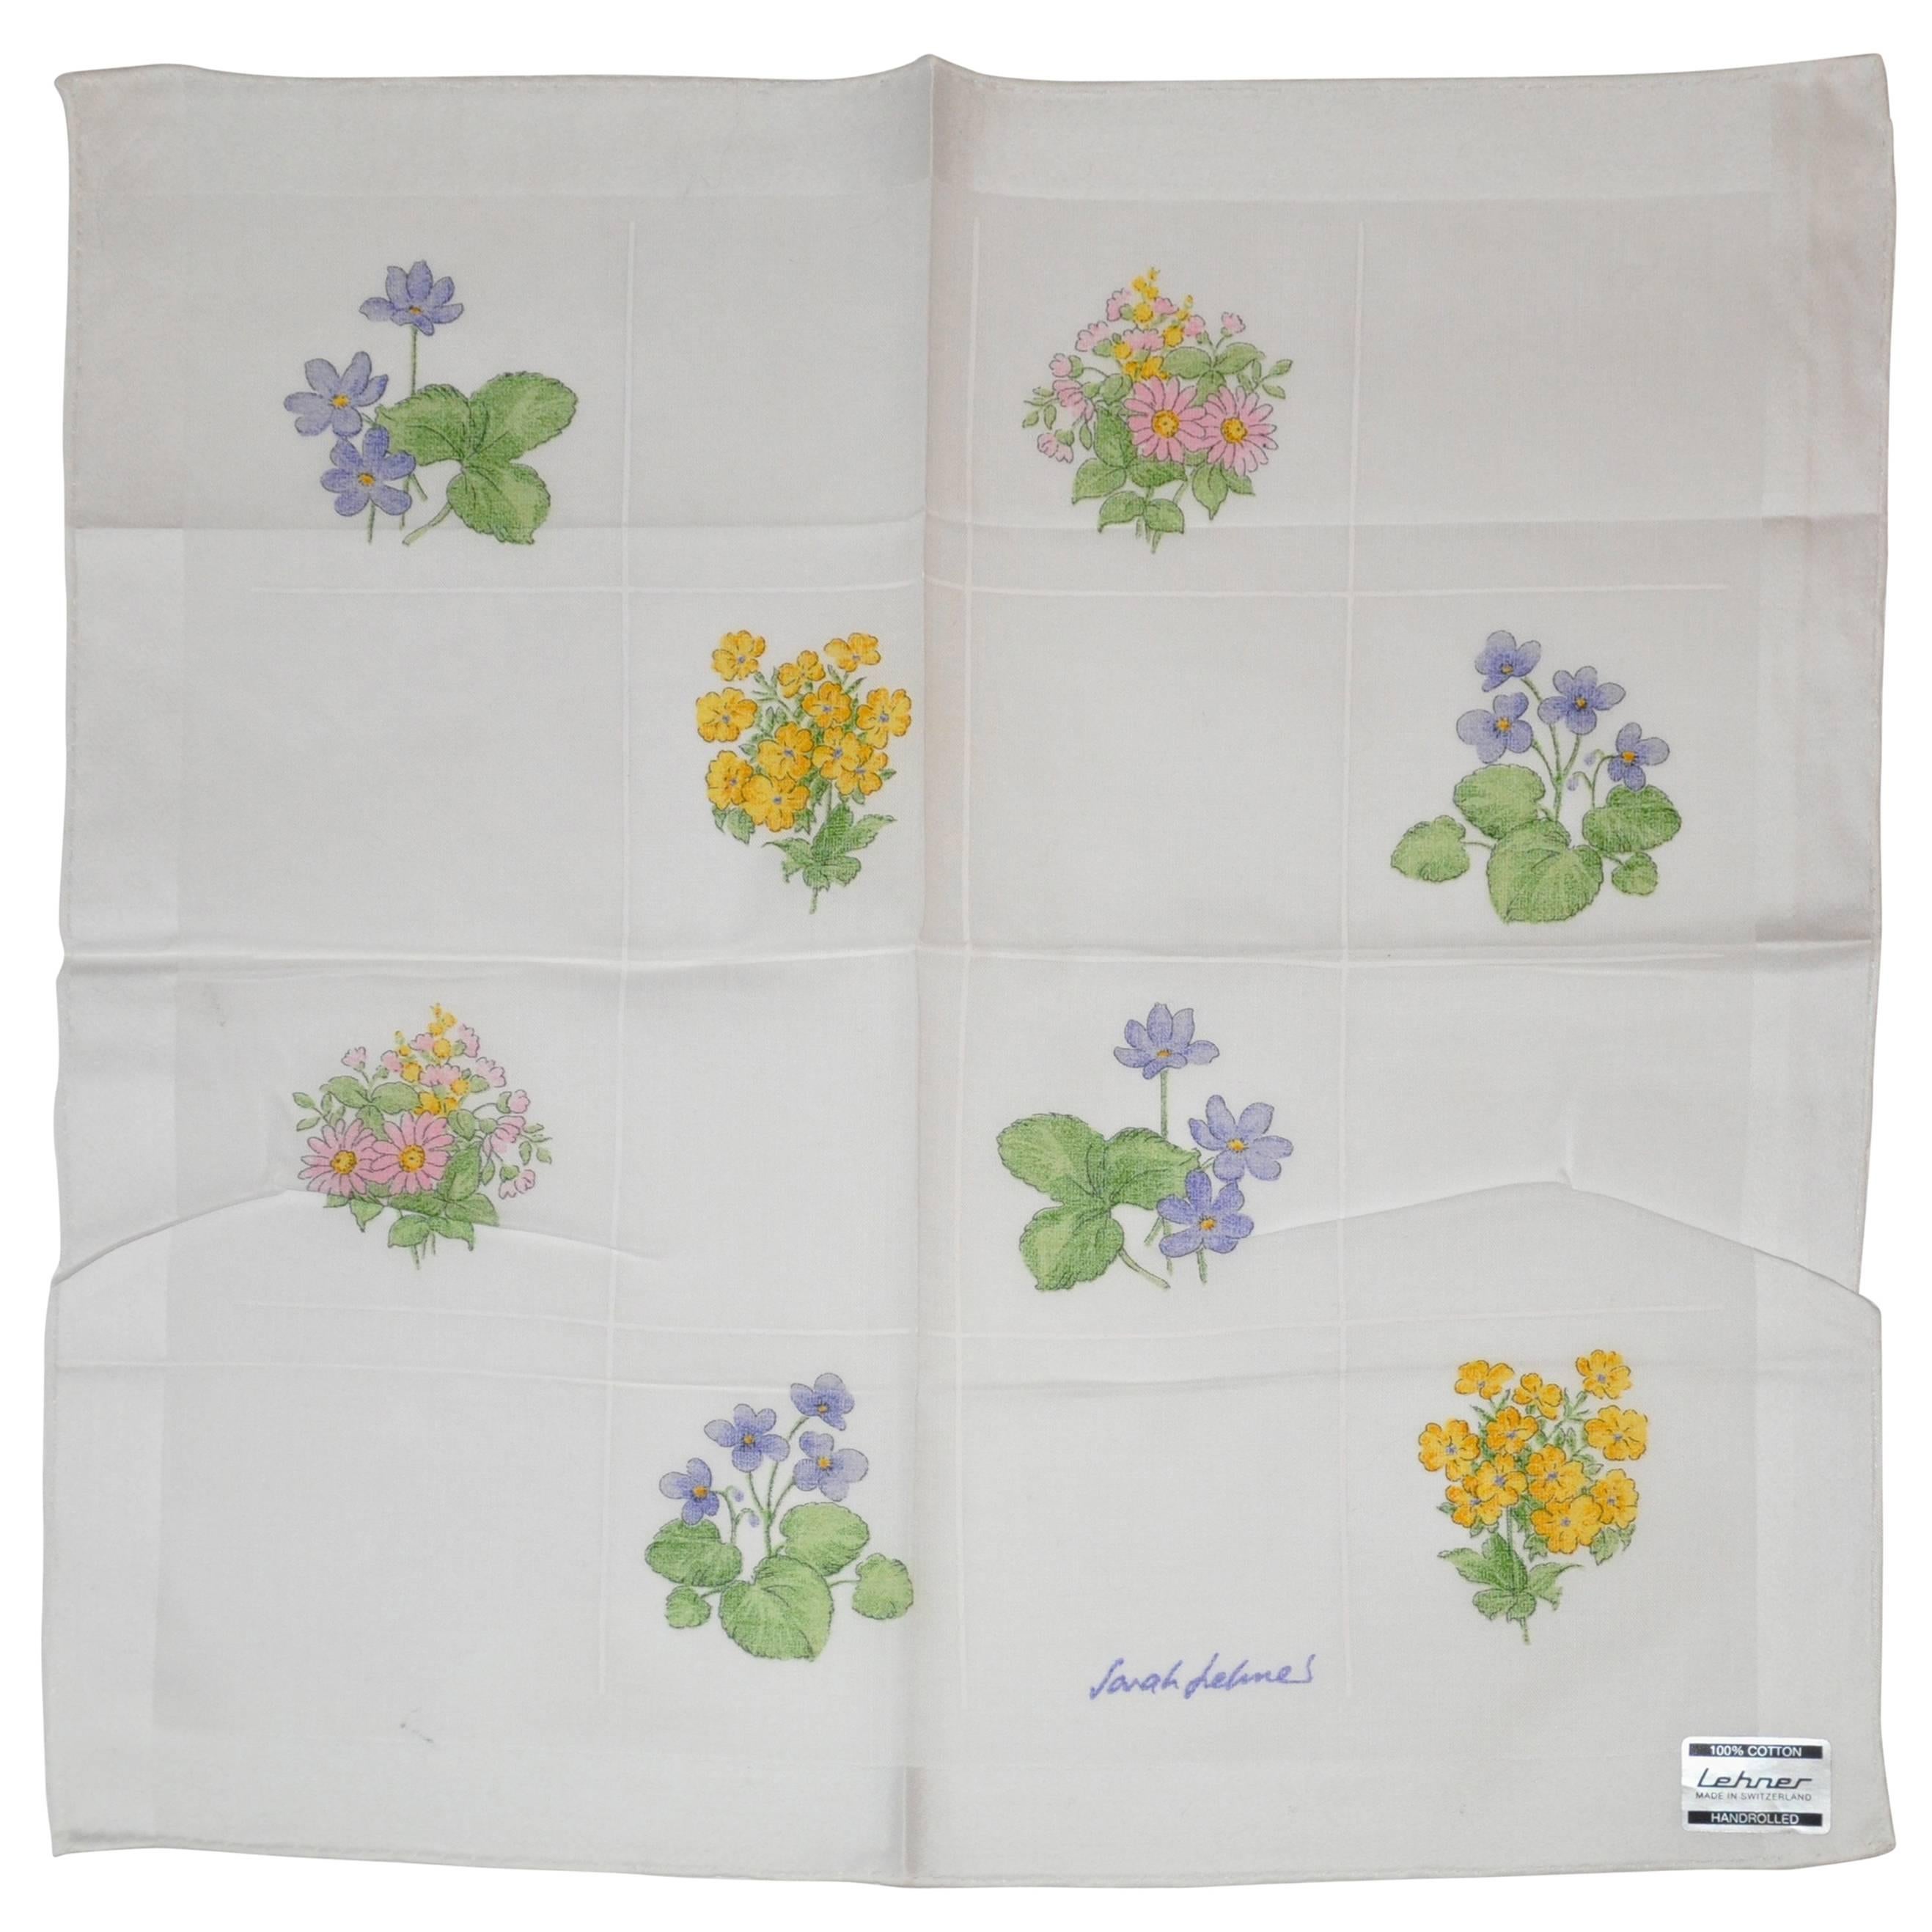 Sarah Lelines Hand-Stitched 100% Cotton "Floral Collection" Handkerchief